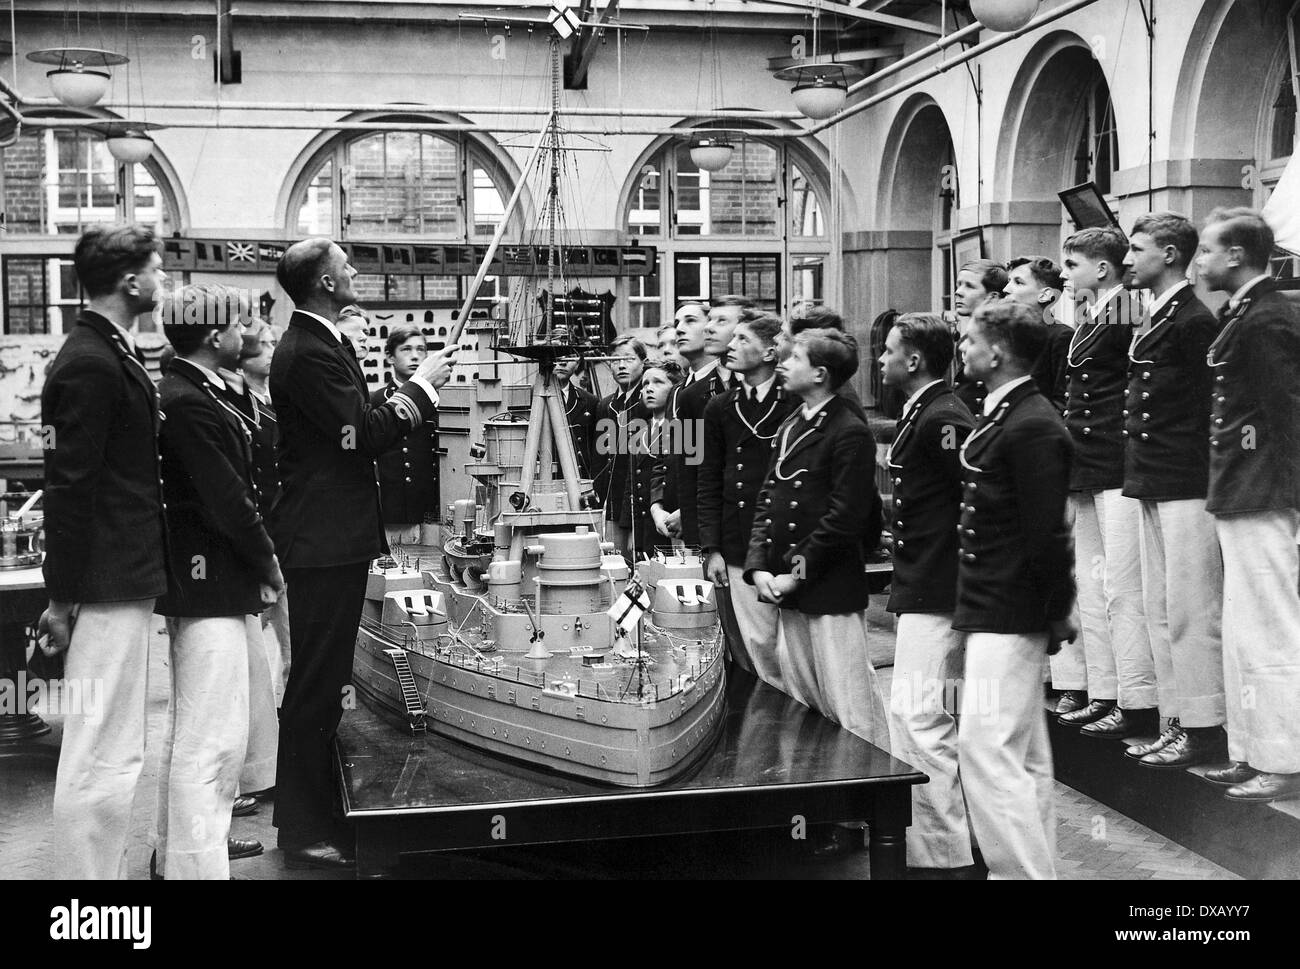 Royal Navy, pre world war two. Officers undergo training at a royal naval college Stock Photo